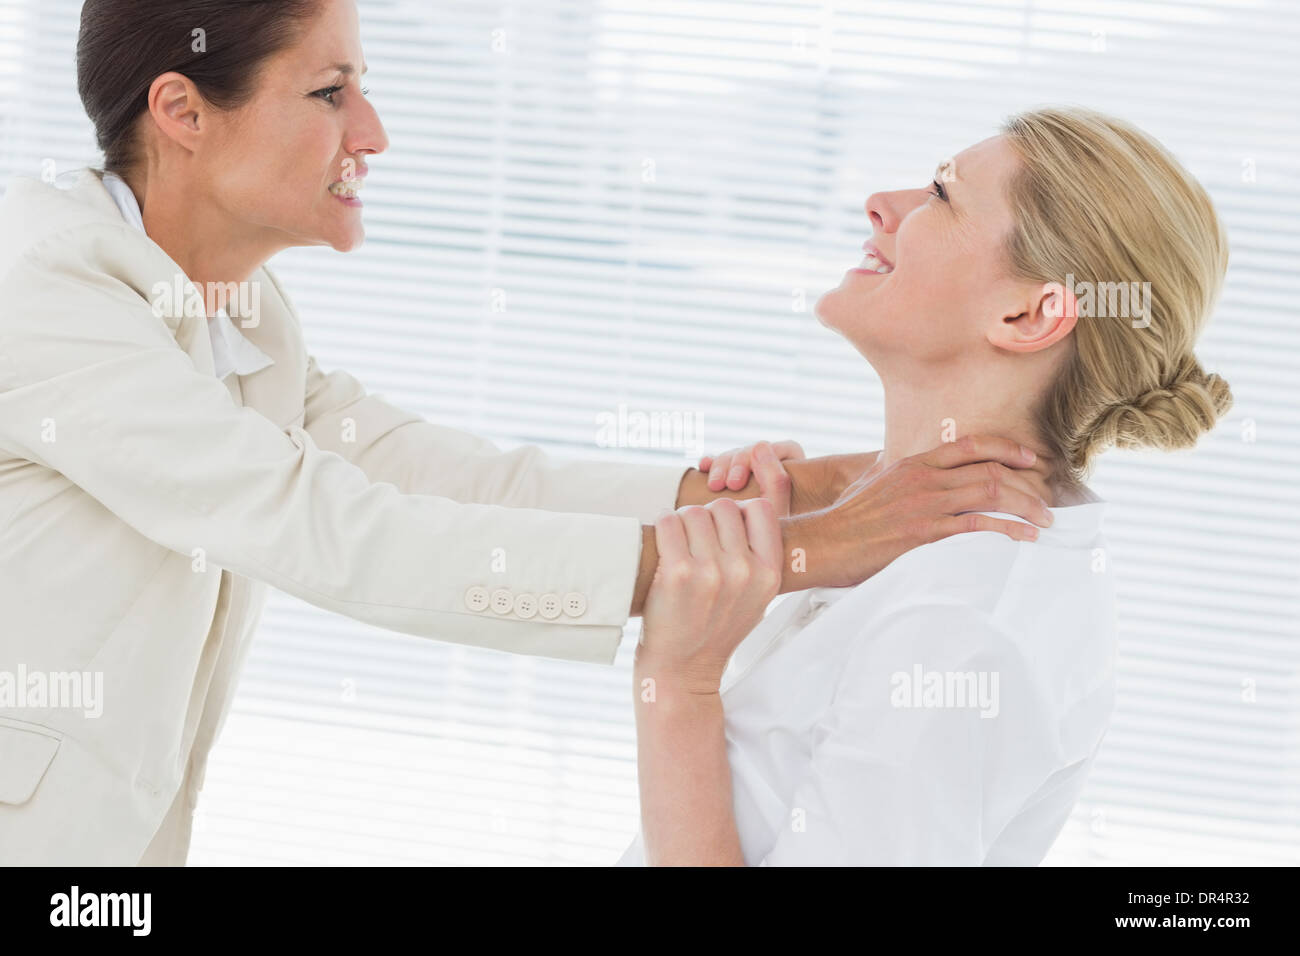 Businesswomen having a violent fight in office Stock Photo